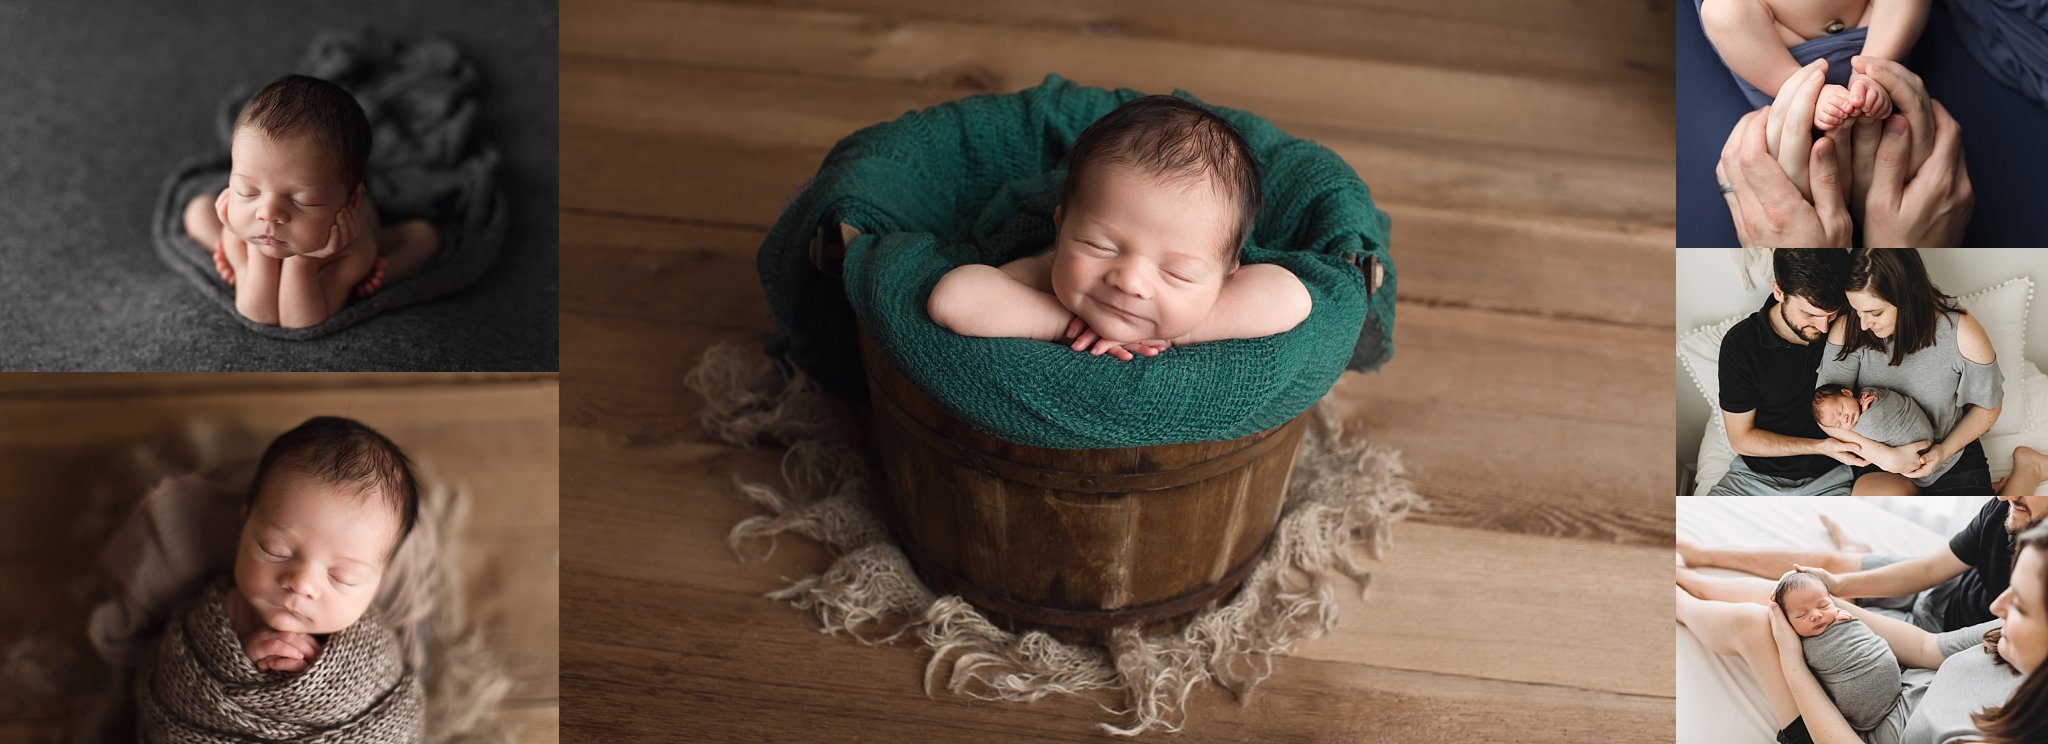 baby boy newborn photo sessin smiling in brown bucket with green blanket